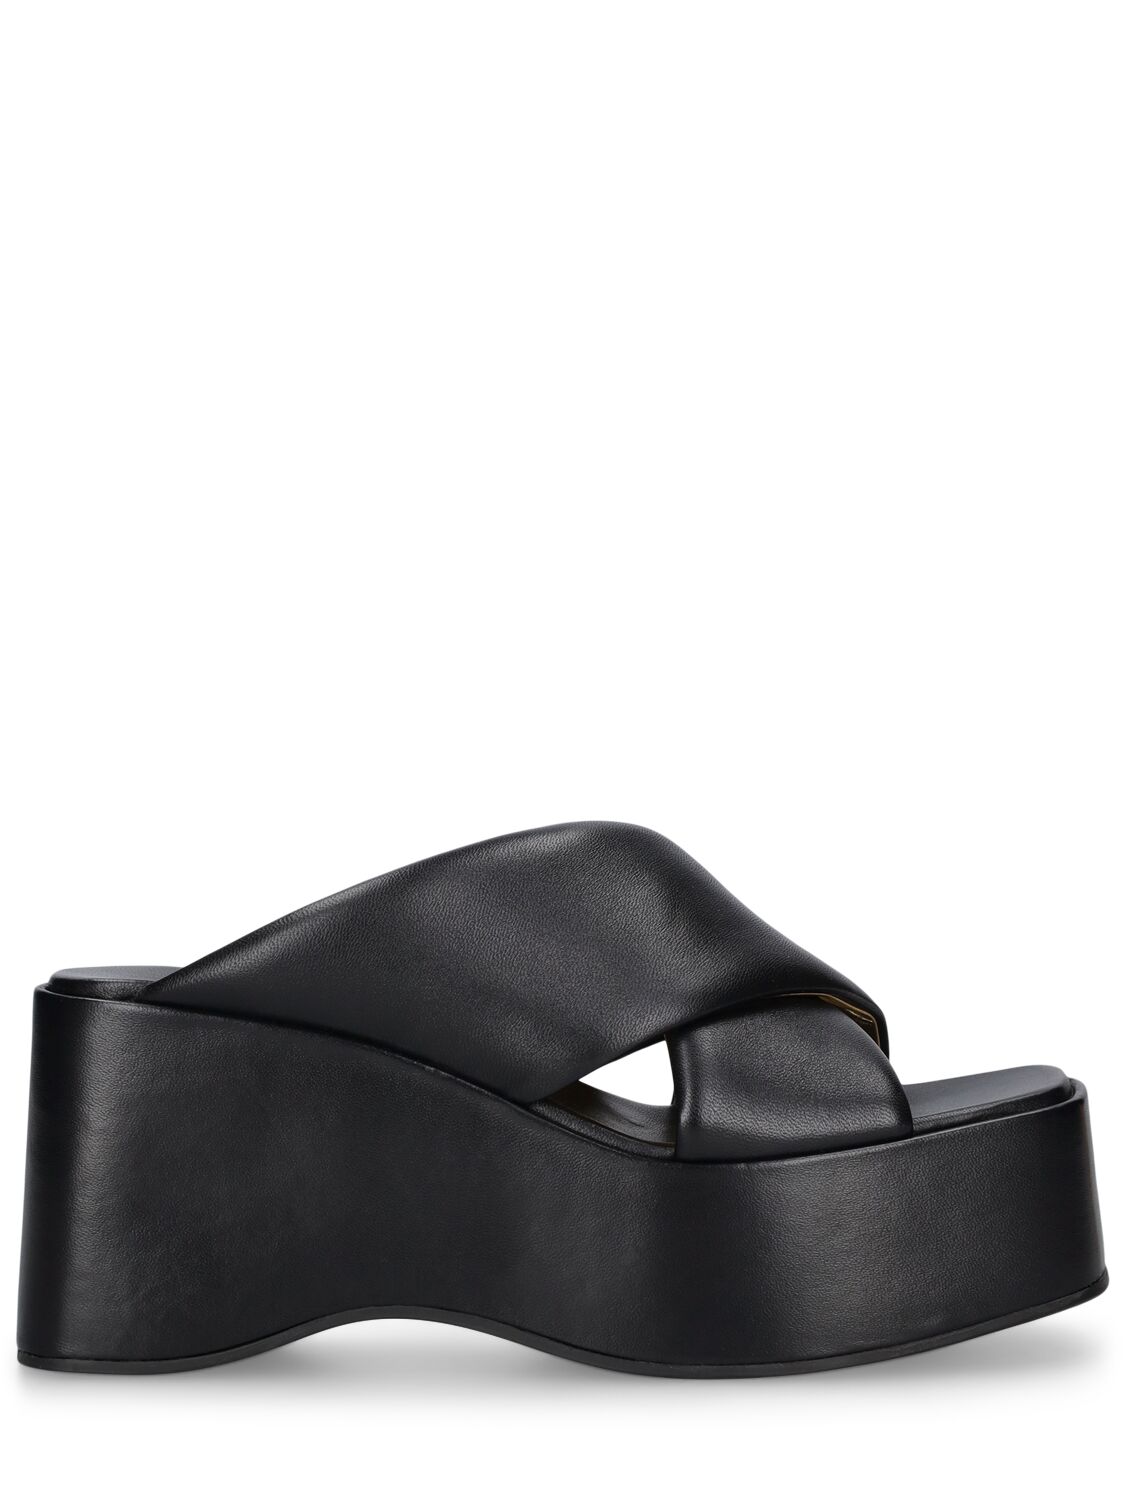 Image of 80mm Vicky Leather Wedges